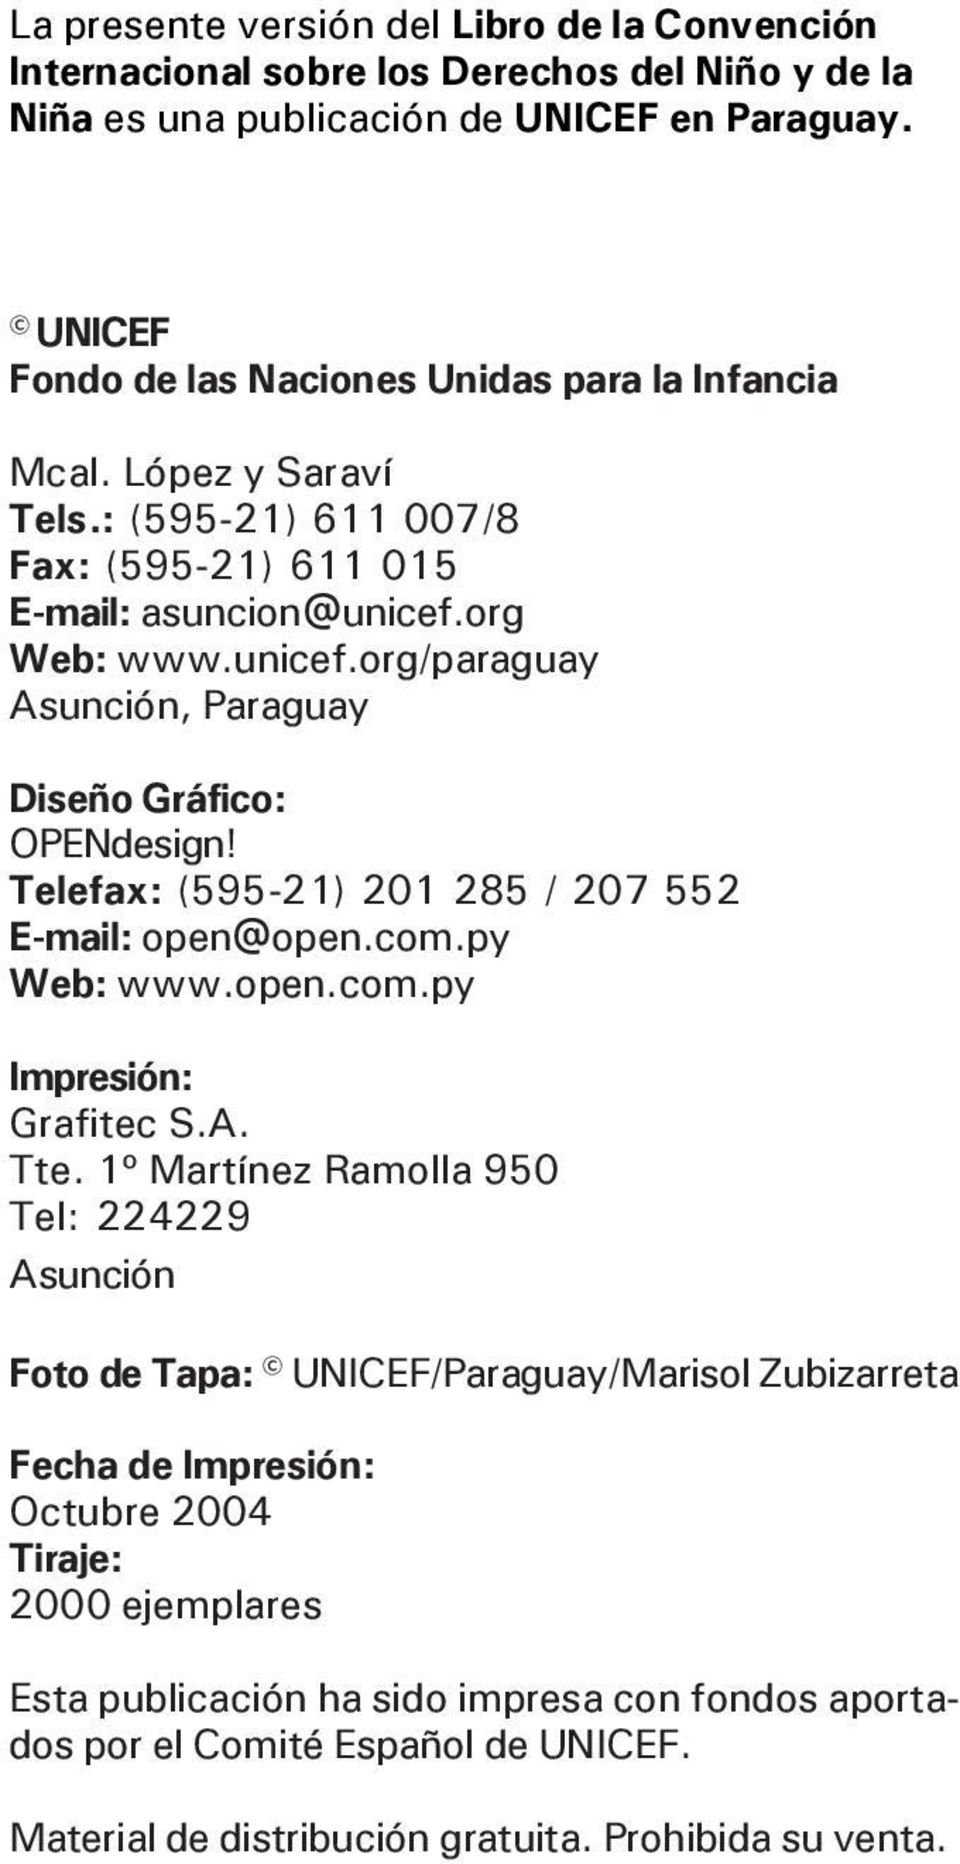 org Web: www.unicef.org/paraguay Asunción, Paraguay Diseño Gráfico: OPENdesign! Telefax: (595-21) 201 285 / 207 552 E-mail: open@open.com.py Web: www.open.com.py Impresión: Grafitec S.A. Tte.